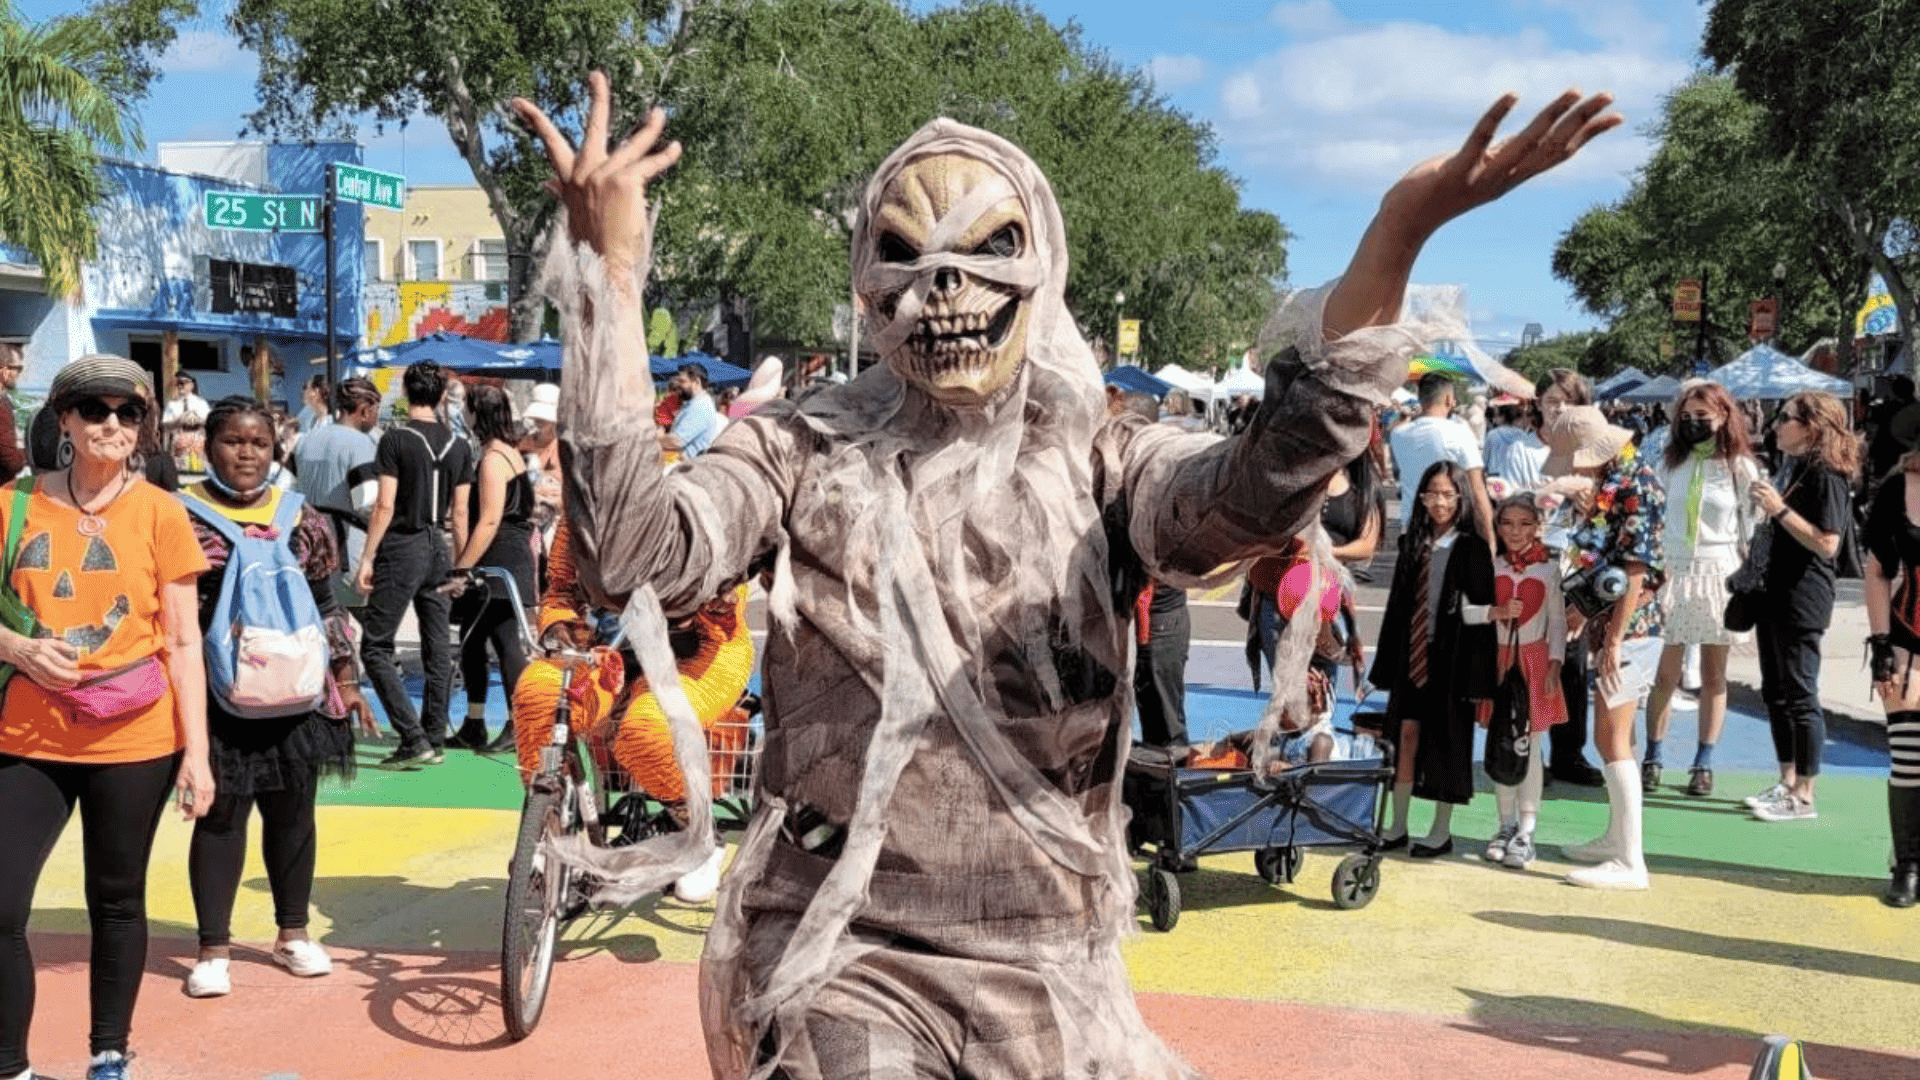 Twomile 'Halloween On Central' street carnival takes over Central